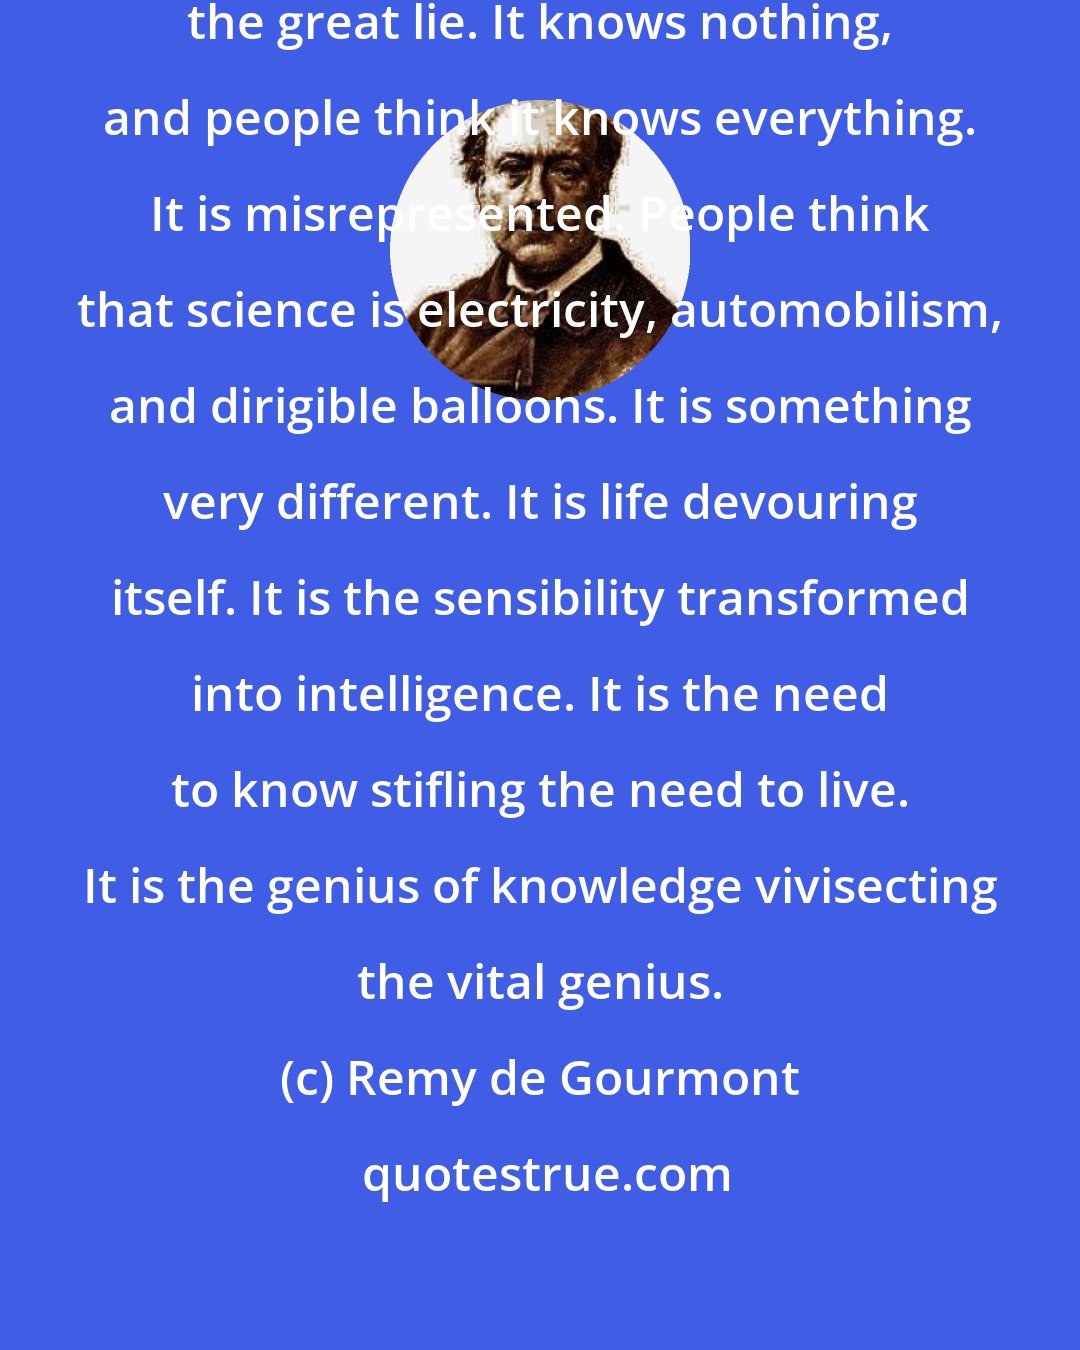 Remy de Gourmont: Science is the only truth and it is the great lie. It knows nothing, and people think it knows everything. It is misrepresented. People think that science is electricity, automobilism, and dirigible balloons. It is something very different. It is life devouring itself. It is the sensibility transformed into intelligence. It is the need to know stifling the need to live. It is the genius of knowledge vivisecting the vital genius.